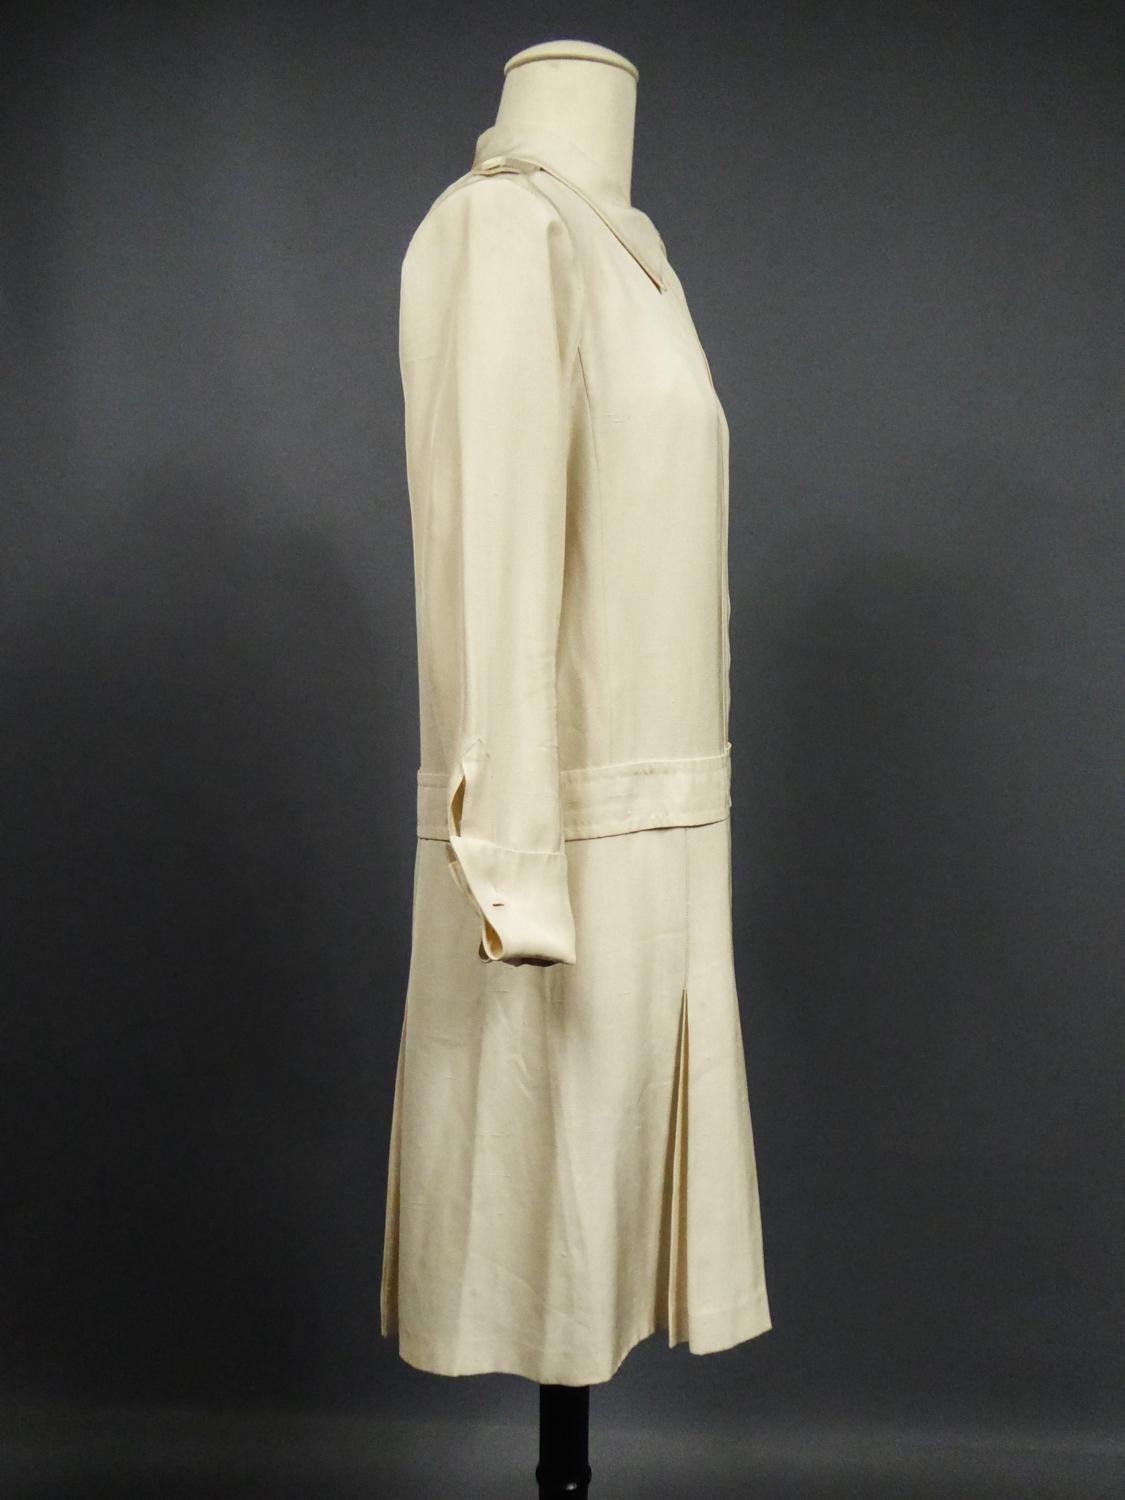 An Yves Saint Laurent Cocktail Dress Numbered 15193 - 1965 Collection 10